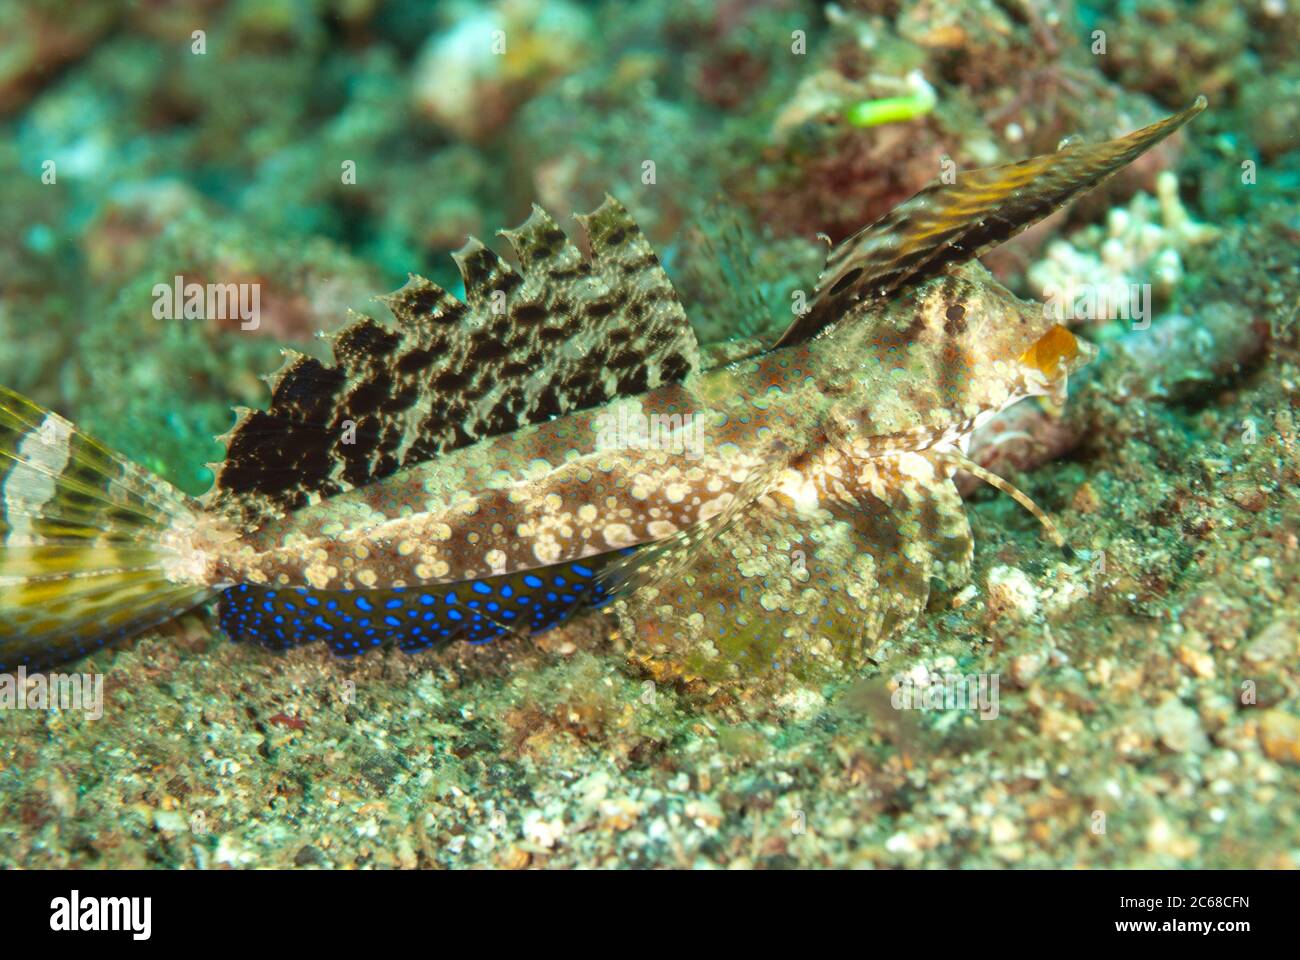 Female Fingered Dragonet, Dactylopus dactylopus, with extended fin, Makawide Slope dive site, Lembeh Straits, Sulawesi, Indonesia Stock Photo